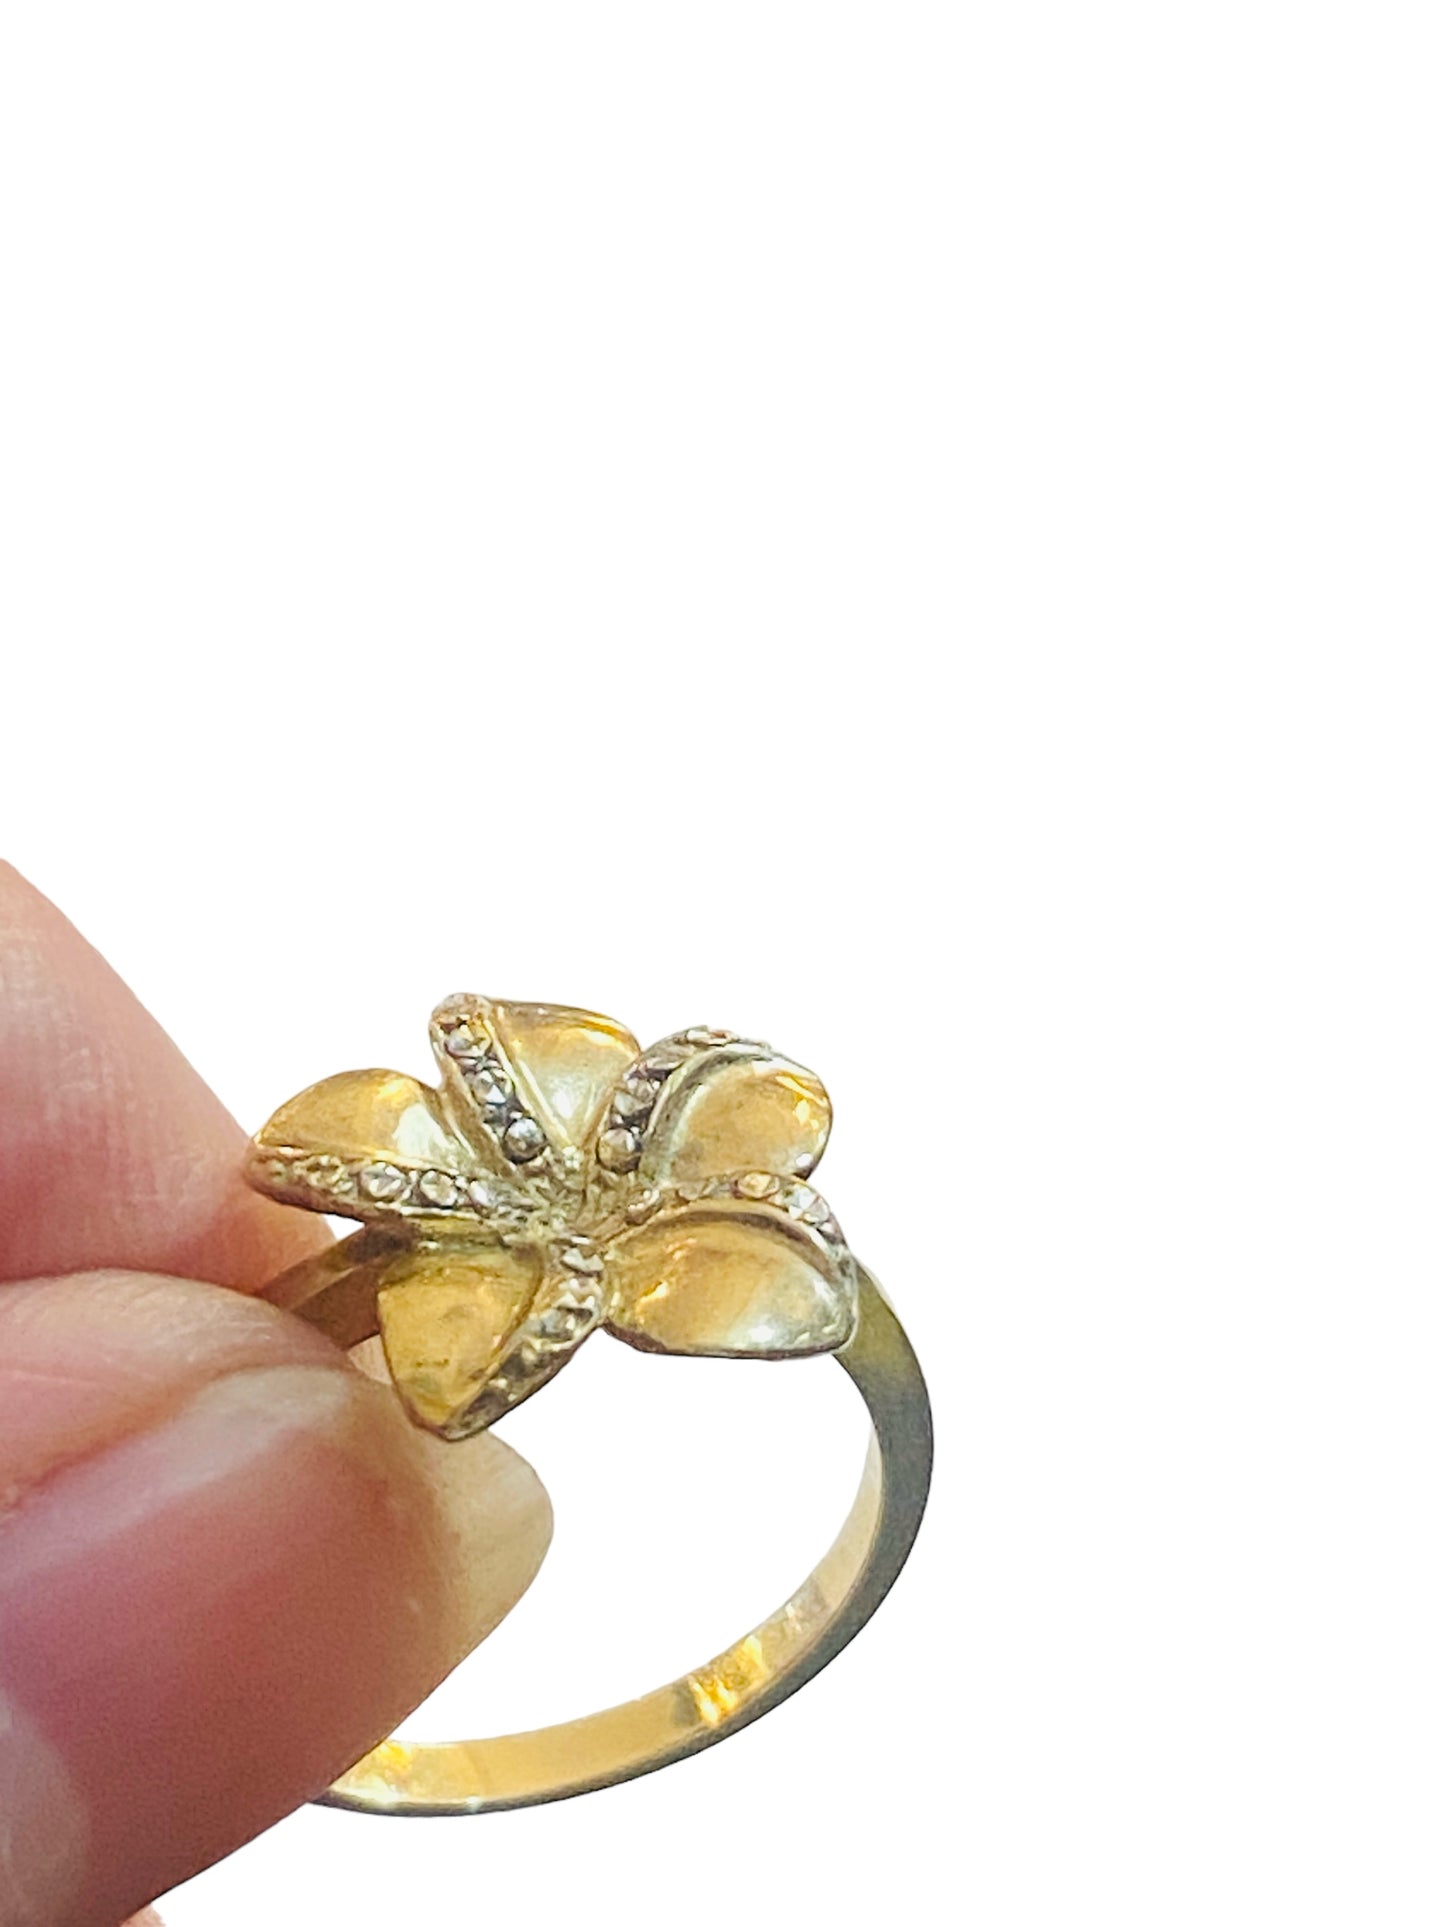 9ct vintage / pre owned flower style ring size O